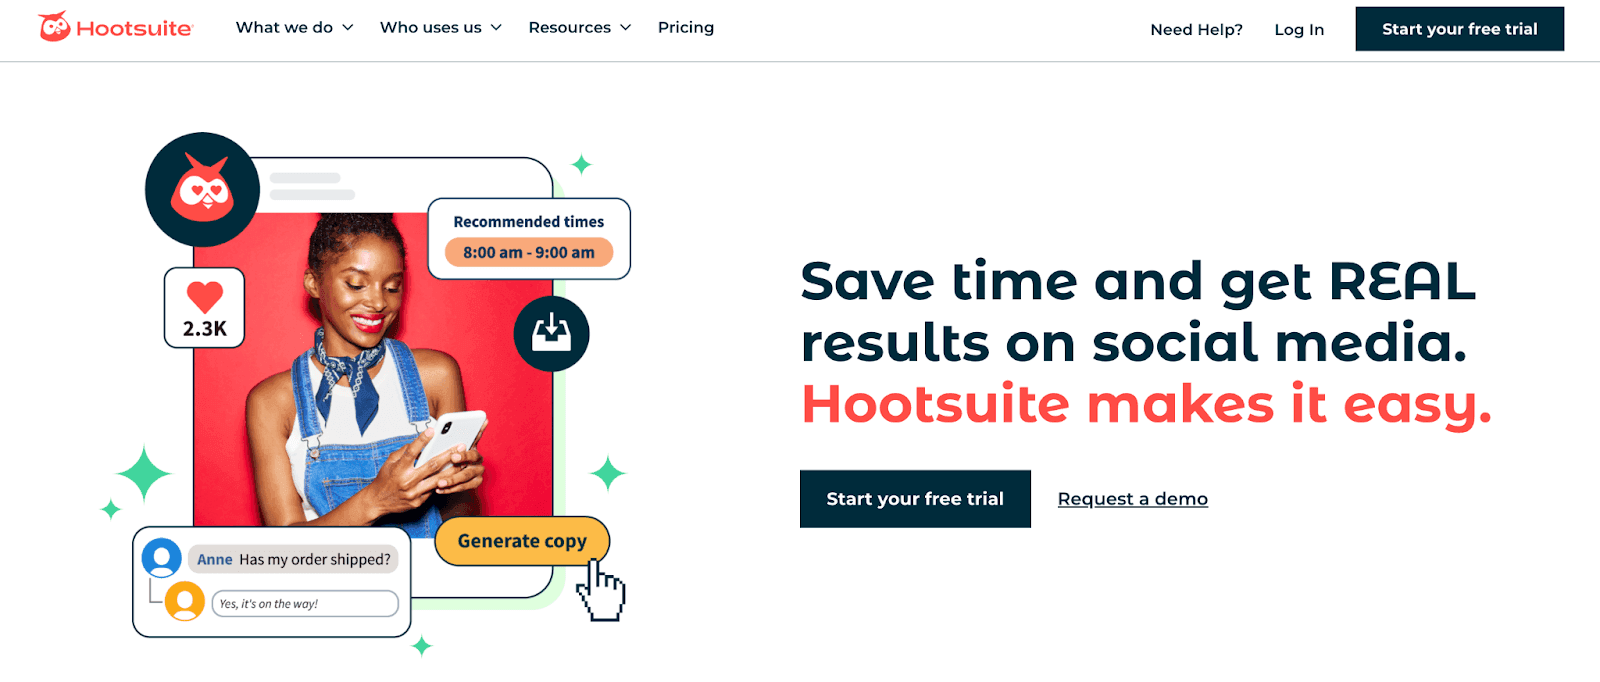 Save time and get REAL results on social media. Hootsuite makes it easy